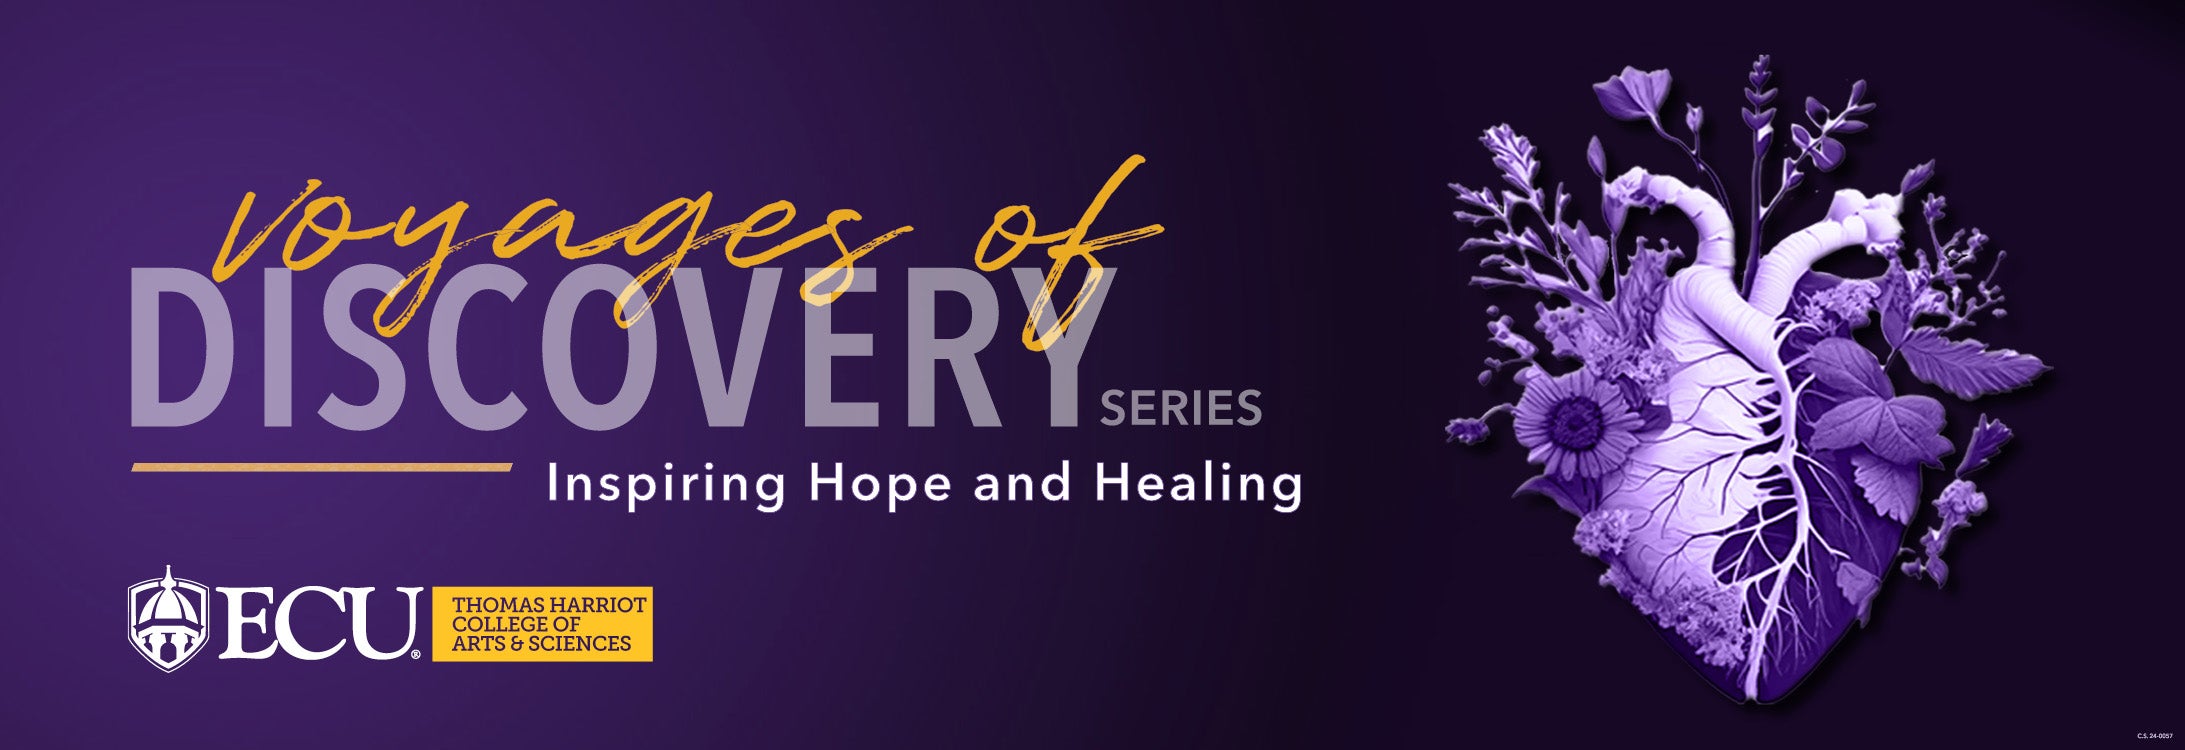 This year's Voyages of Discovery Series will feature an accomplished actor and an Olympic gymnast who will address the theme of inspiring hope and healing. (ECU Graphic by Creative Services)